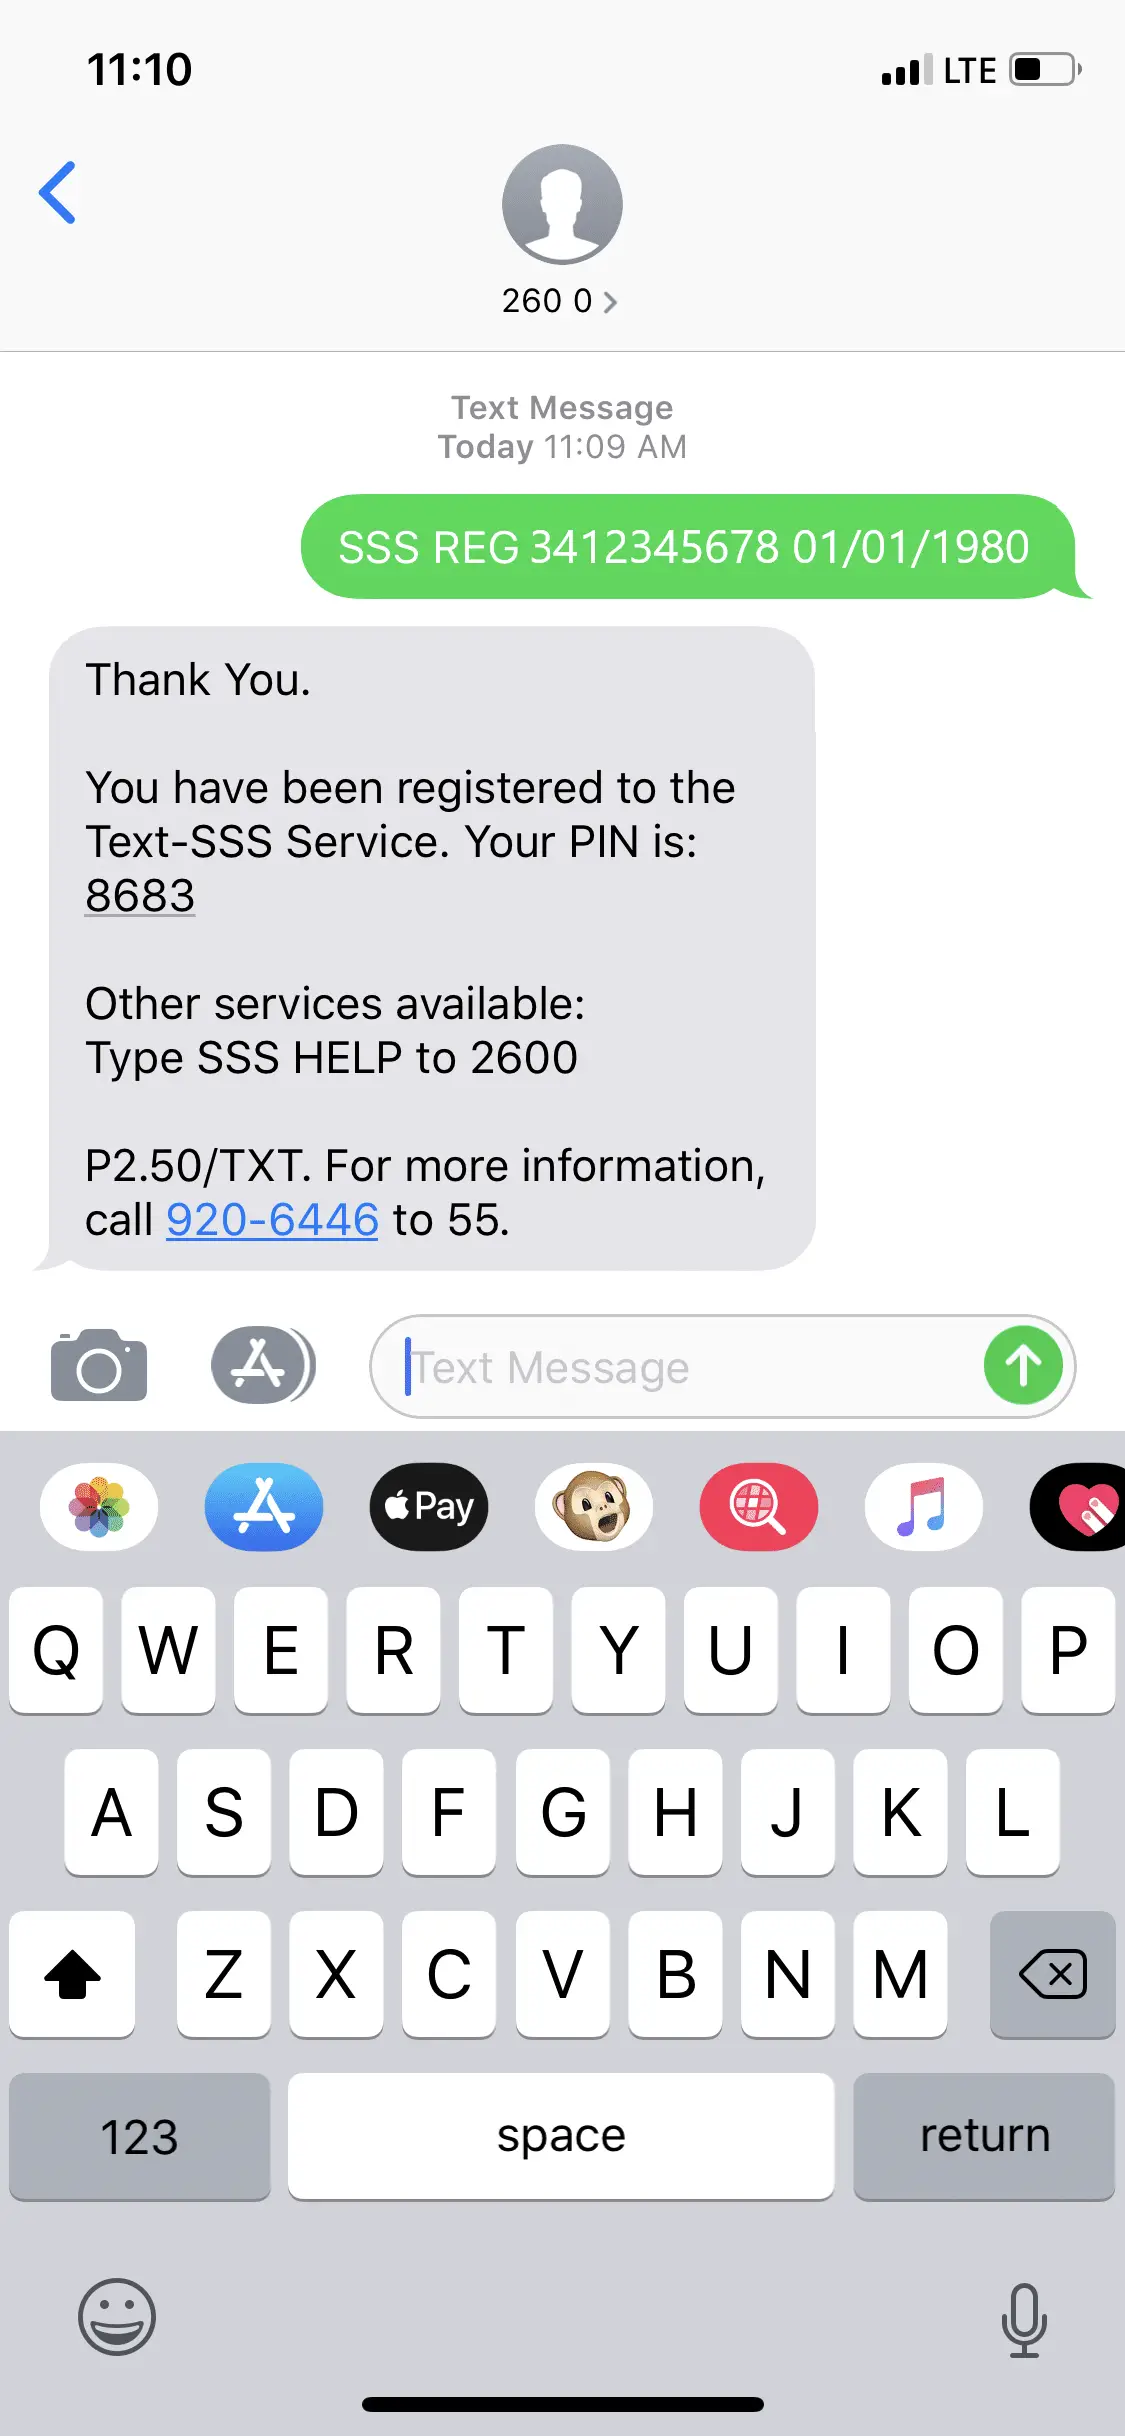 How To Get Your Sss Prn Thru Text Sss Inquiries